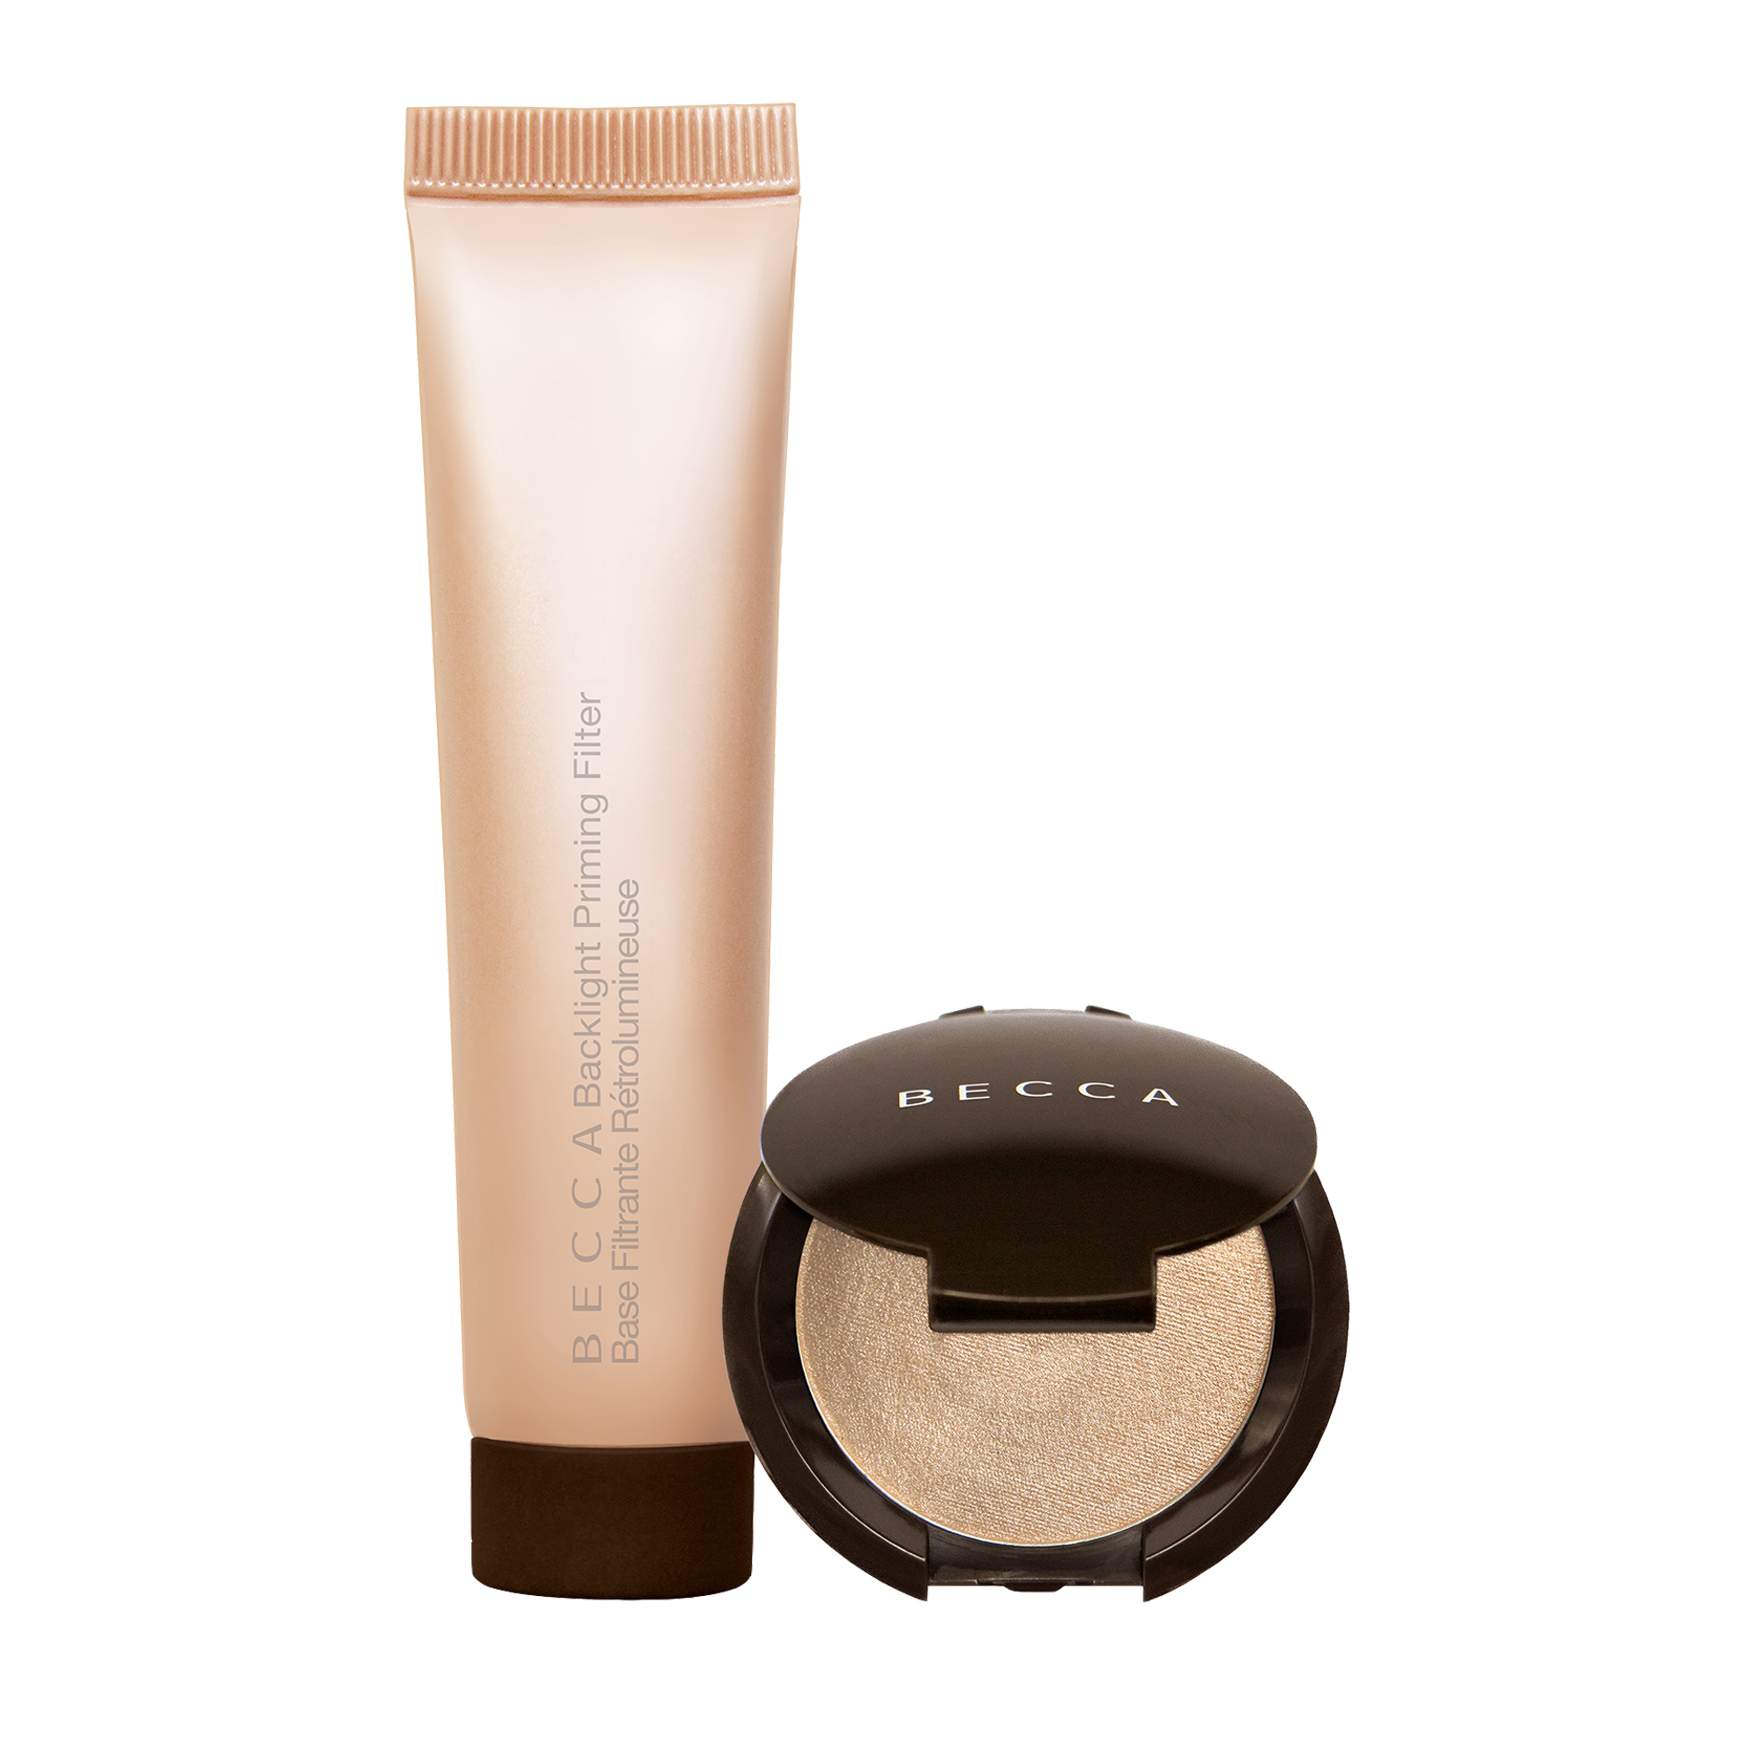 Becca Lit From Within Kit | Space NK